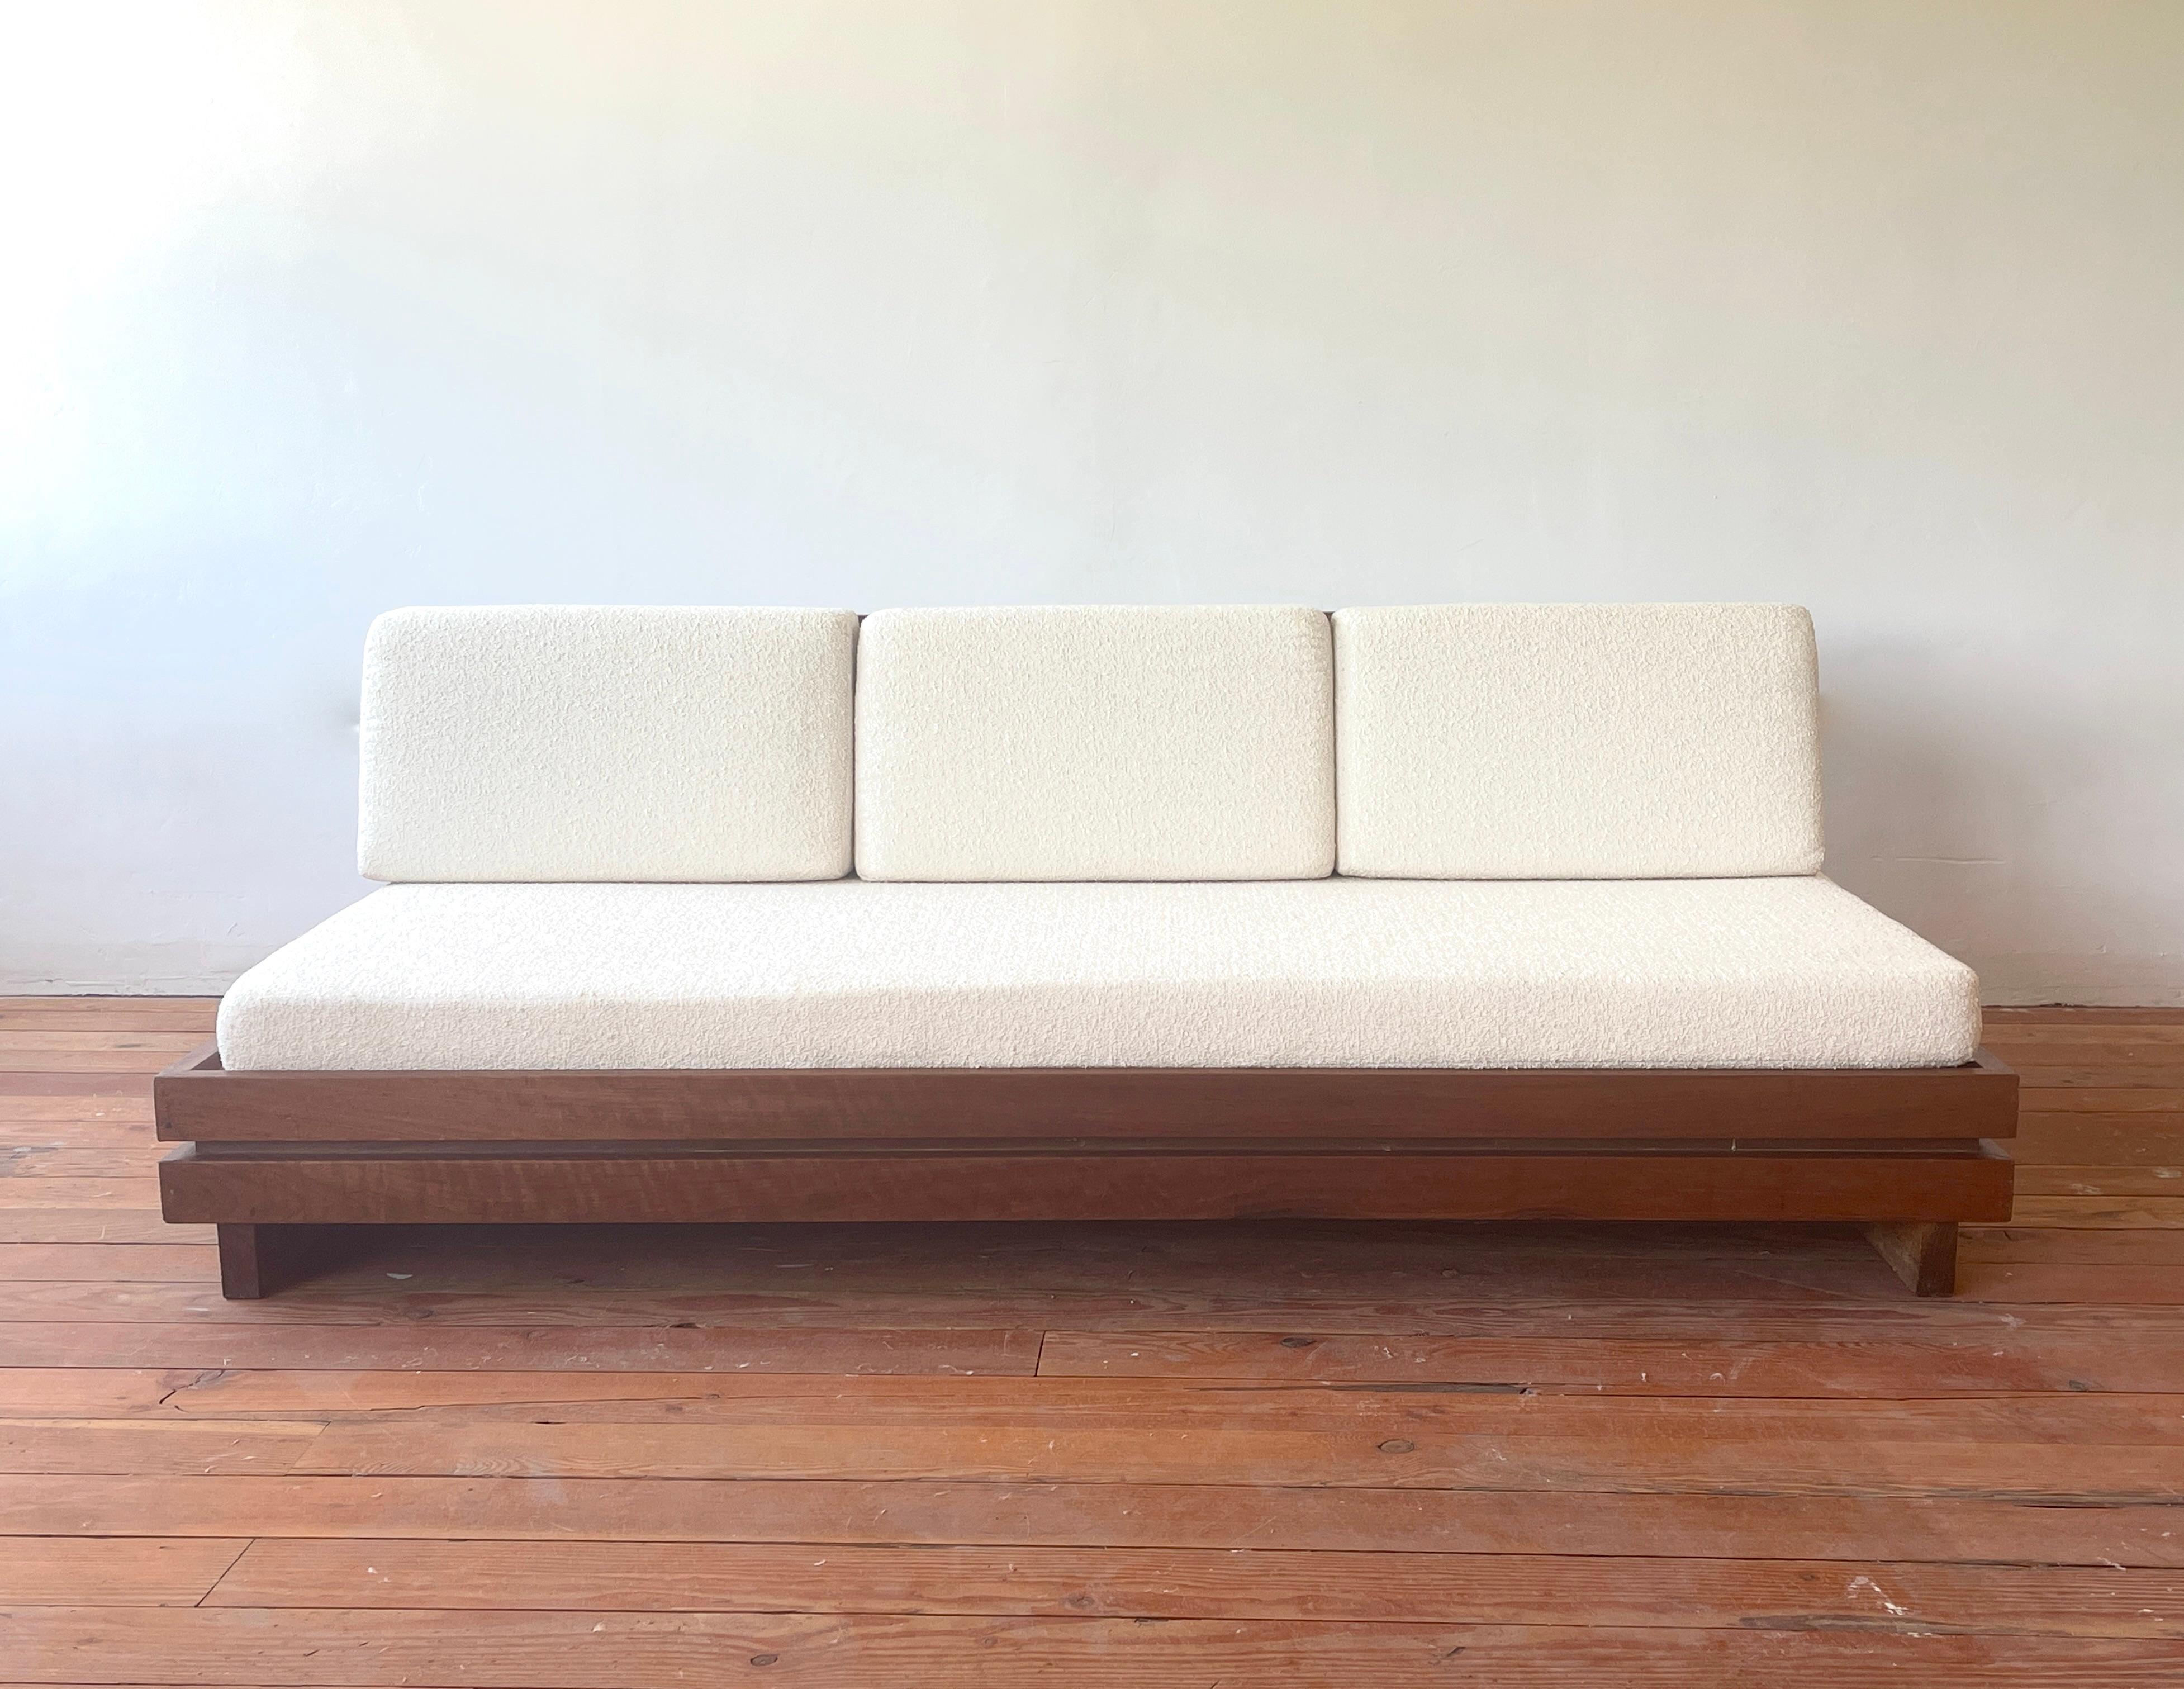 Large bench seat sofa produced in the 1970s by Maison Regain
Solid construction in elm wood reminiscent of Pierre Chapo. 
Beautiful grain to wood - simple lines
Newly upholstered seat and back cushion in white linen from France.